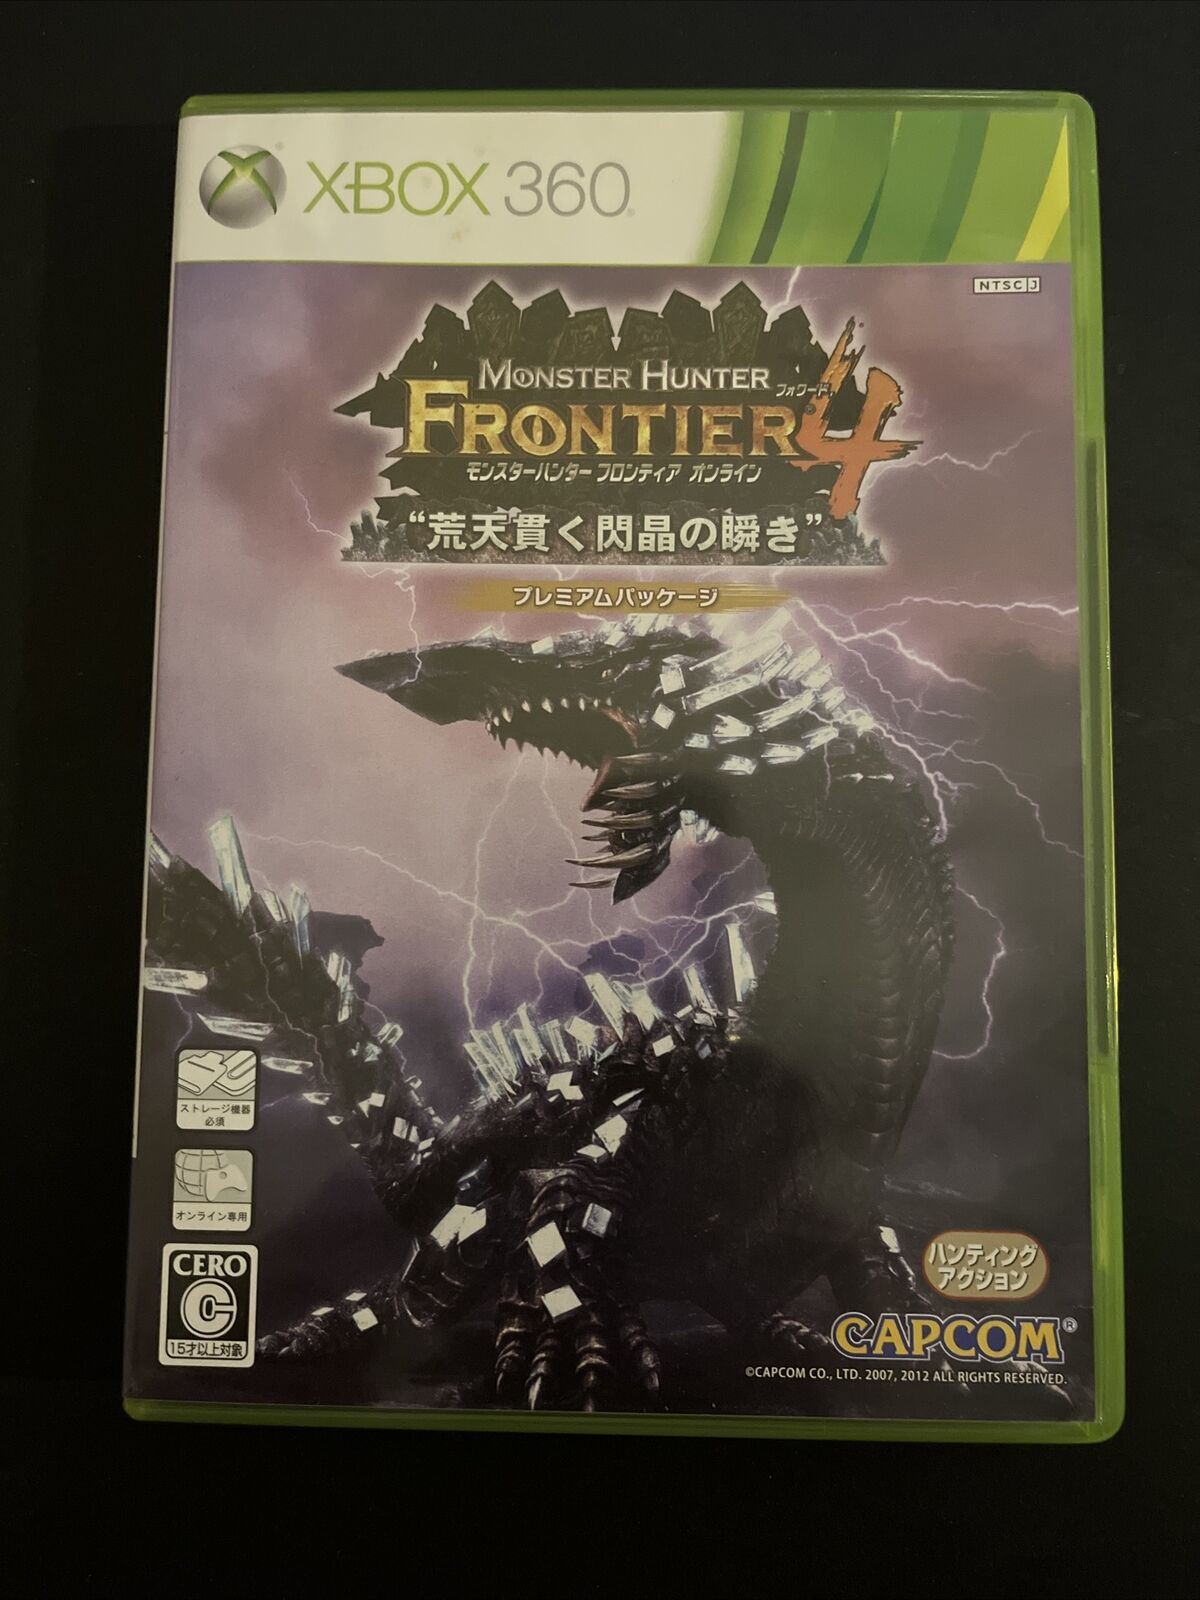 Monster Hunter Frontier 4 - Microsoft XBOX 360 NTSC-J JAPAN Game with Manual